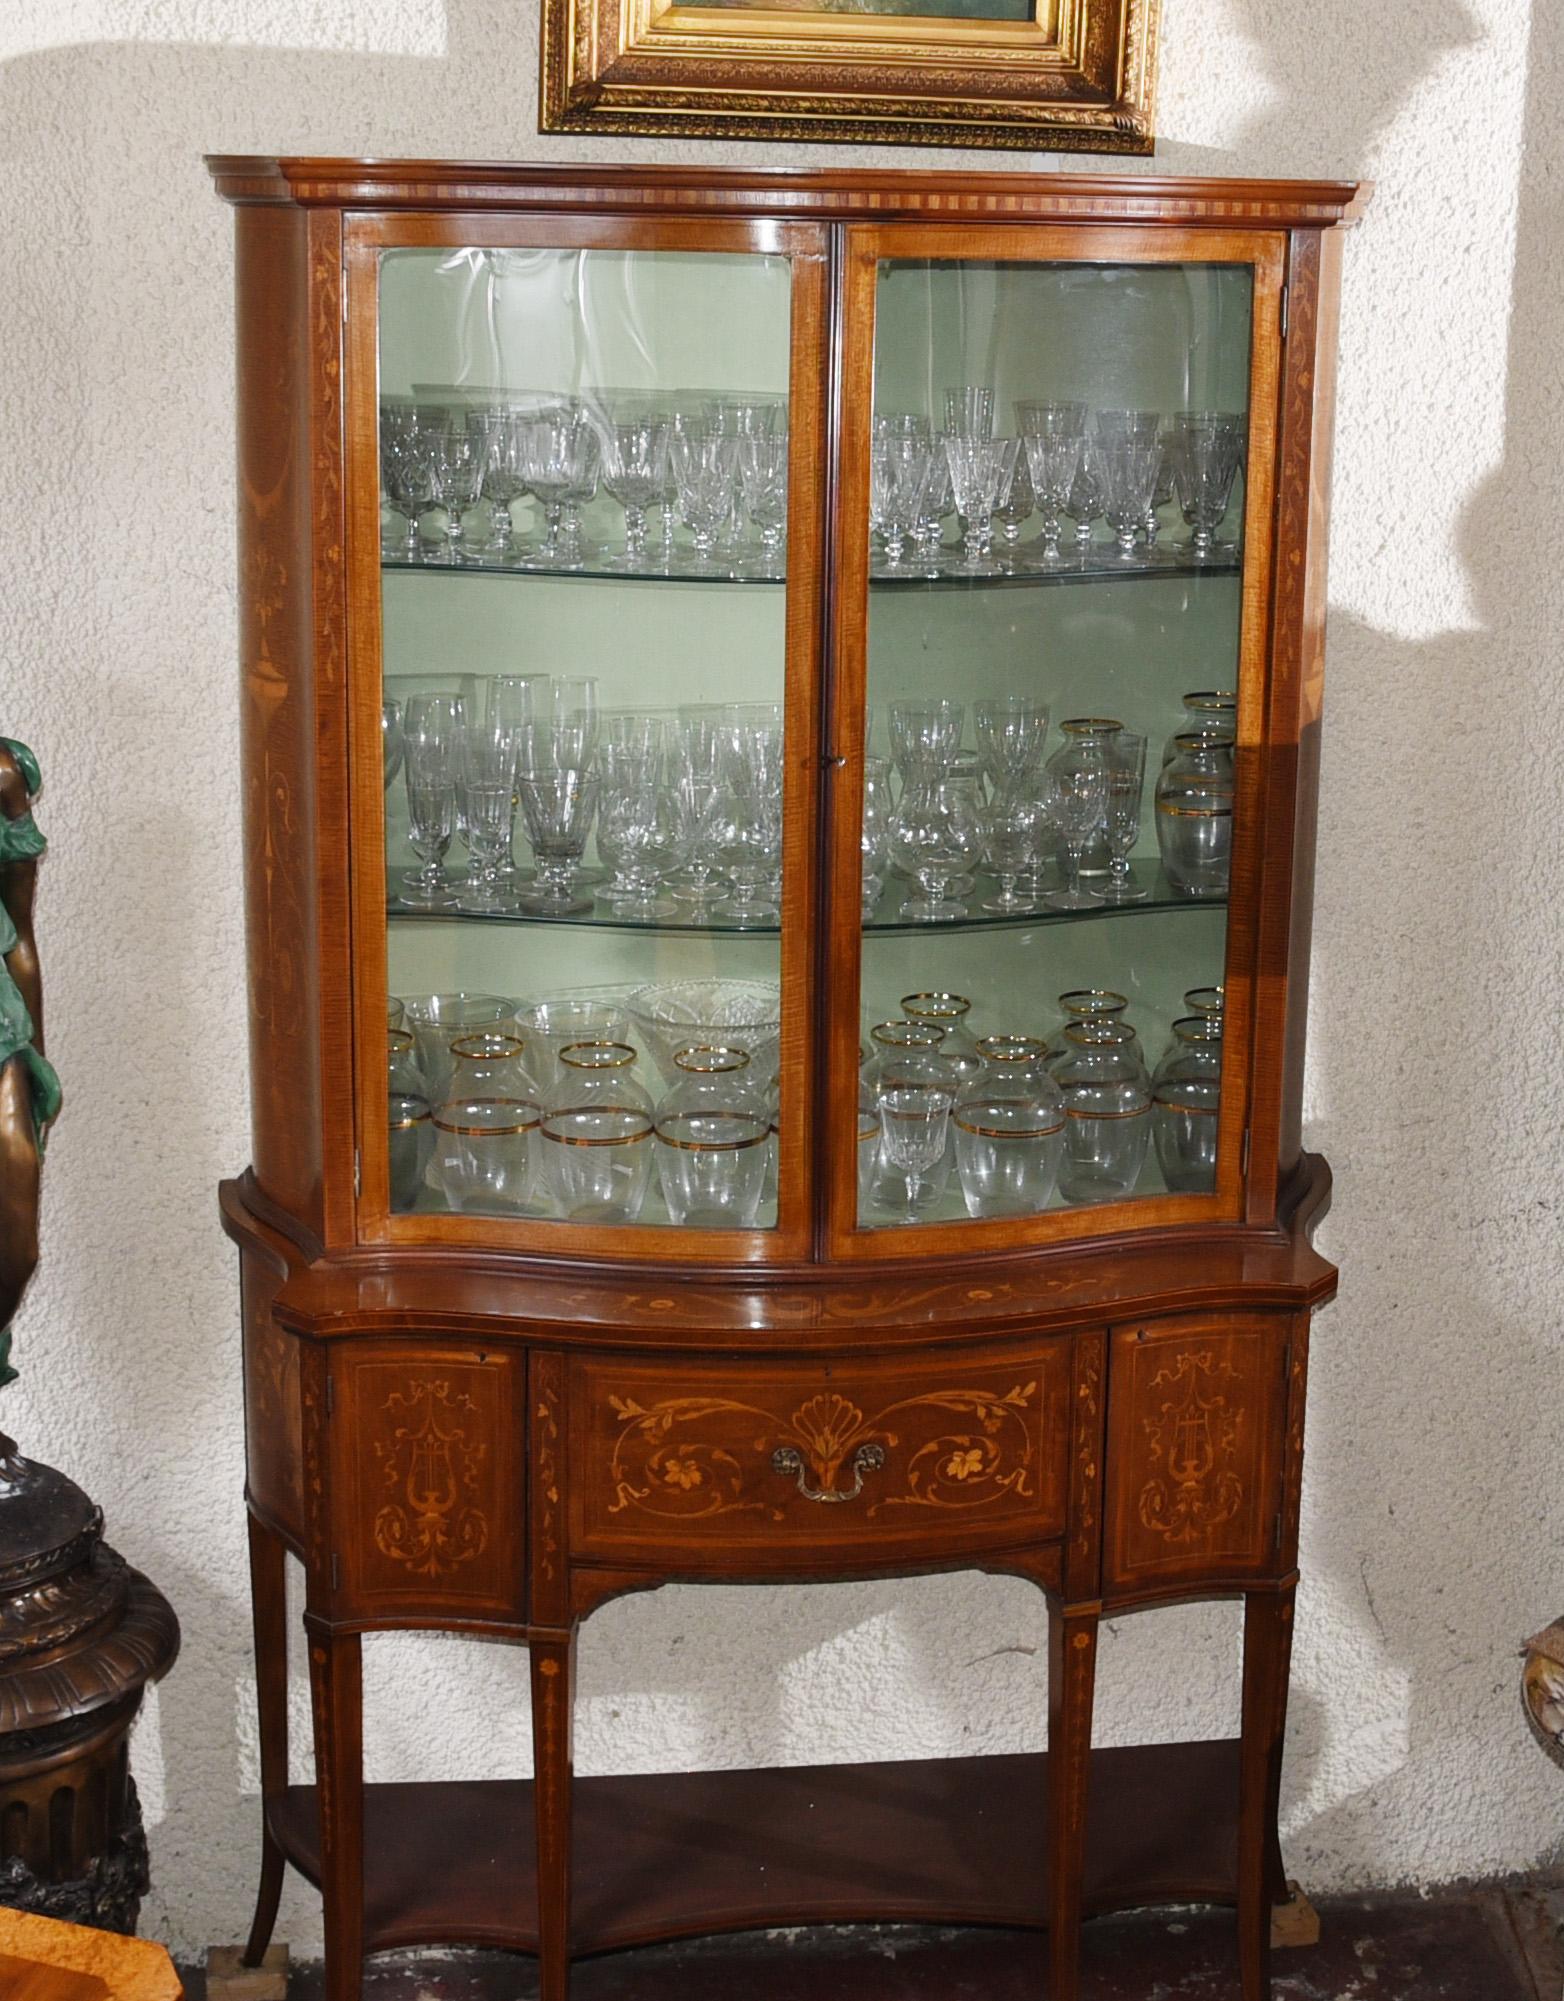 Gorgeous Regency Sheraton style display cabinet / bookcase
Serpentine form to the front
Great for displaying decorative pieces such as glass and porcelain
Intricate inlay work includes floral motifs and urn motifs
Offered in great shape ready for